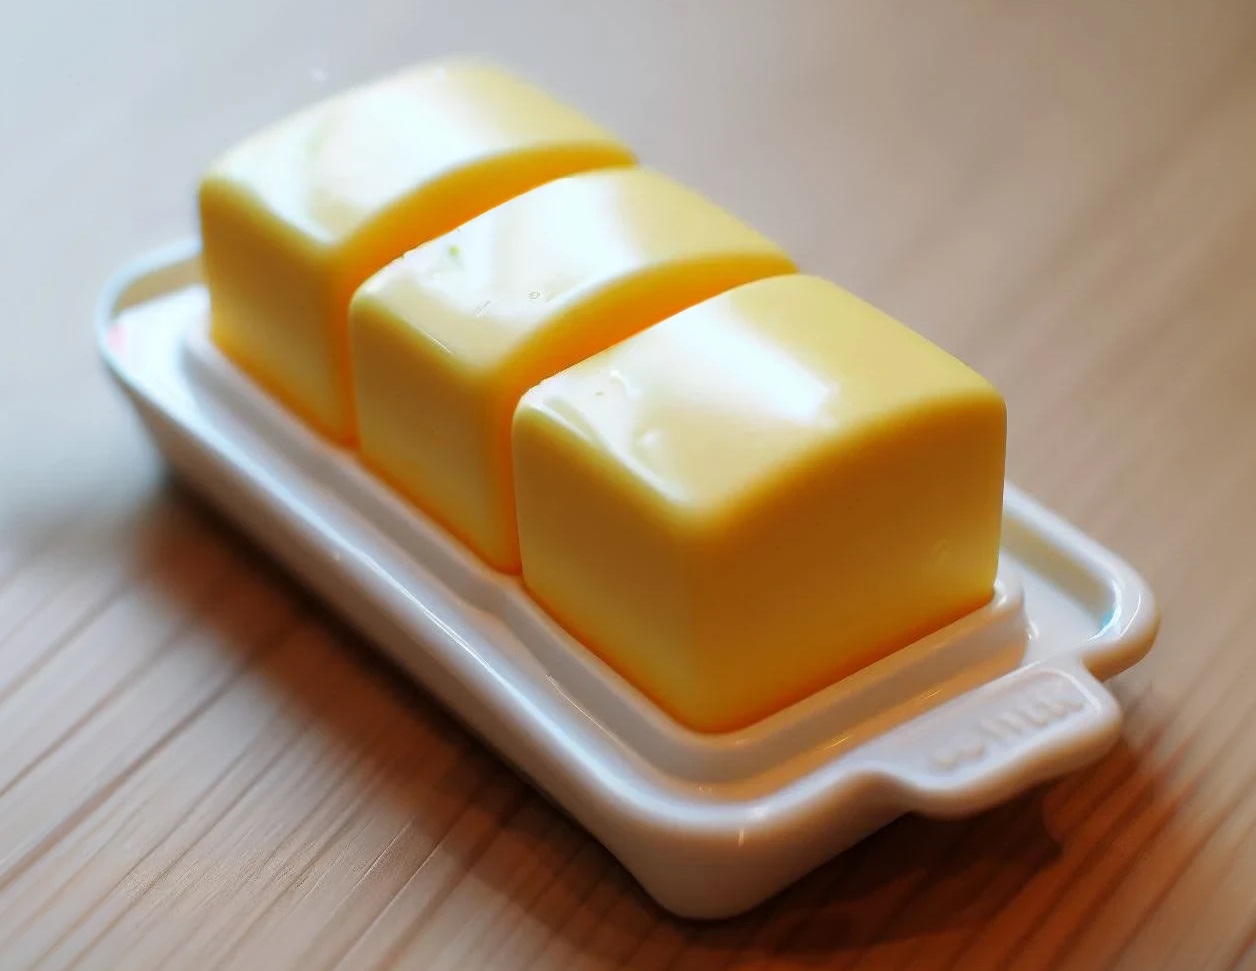 A plastic children's toy that looks like butter on a tray